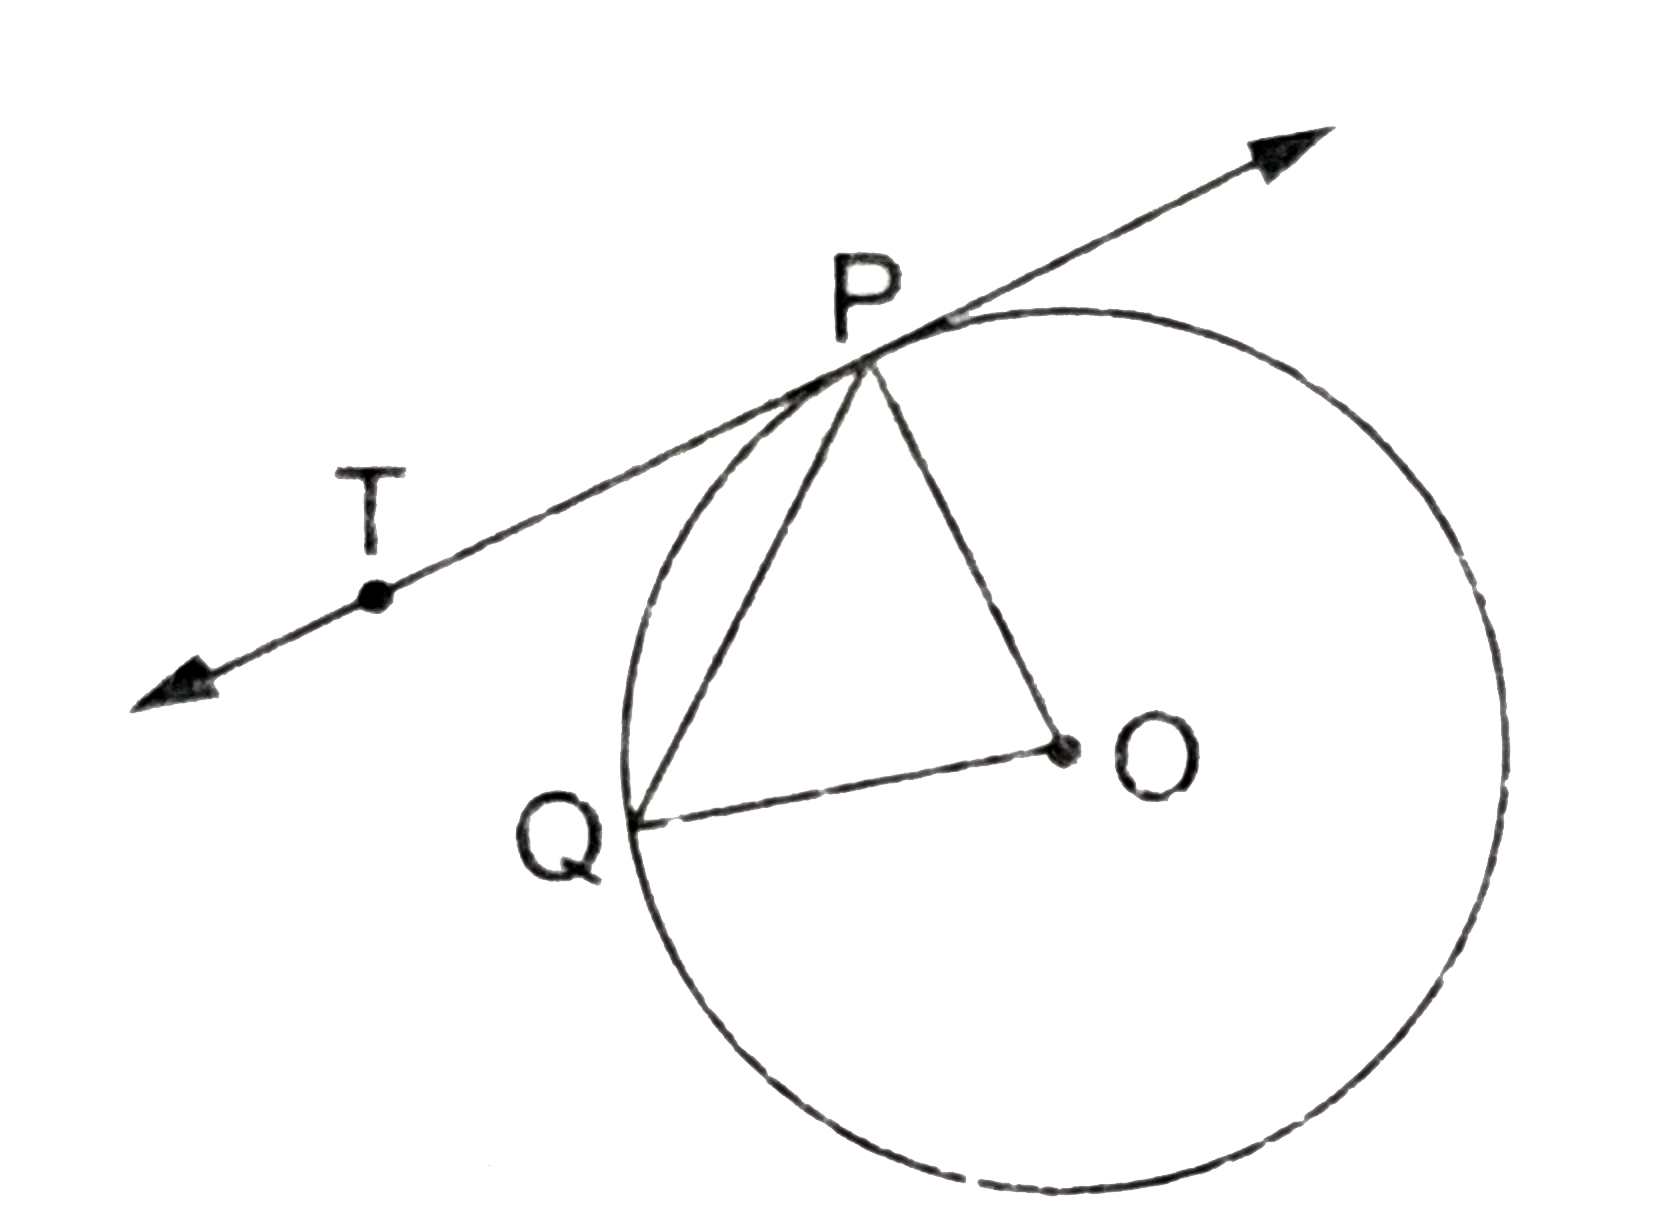 In the given figure, O is the centre of a circle, PQ is a chord and PT is the tangent at P. If /POQ=70^(@), then /TPQ is equal to